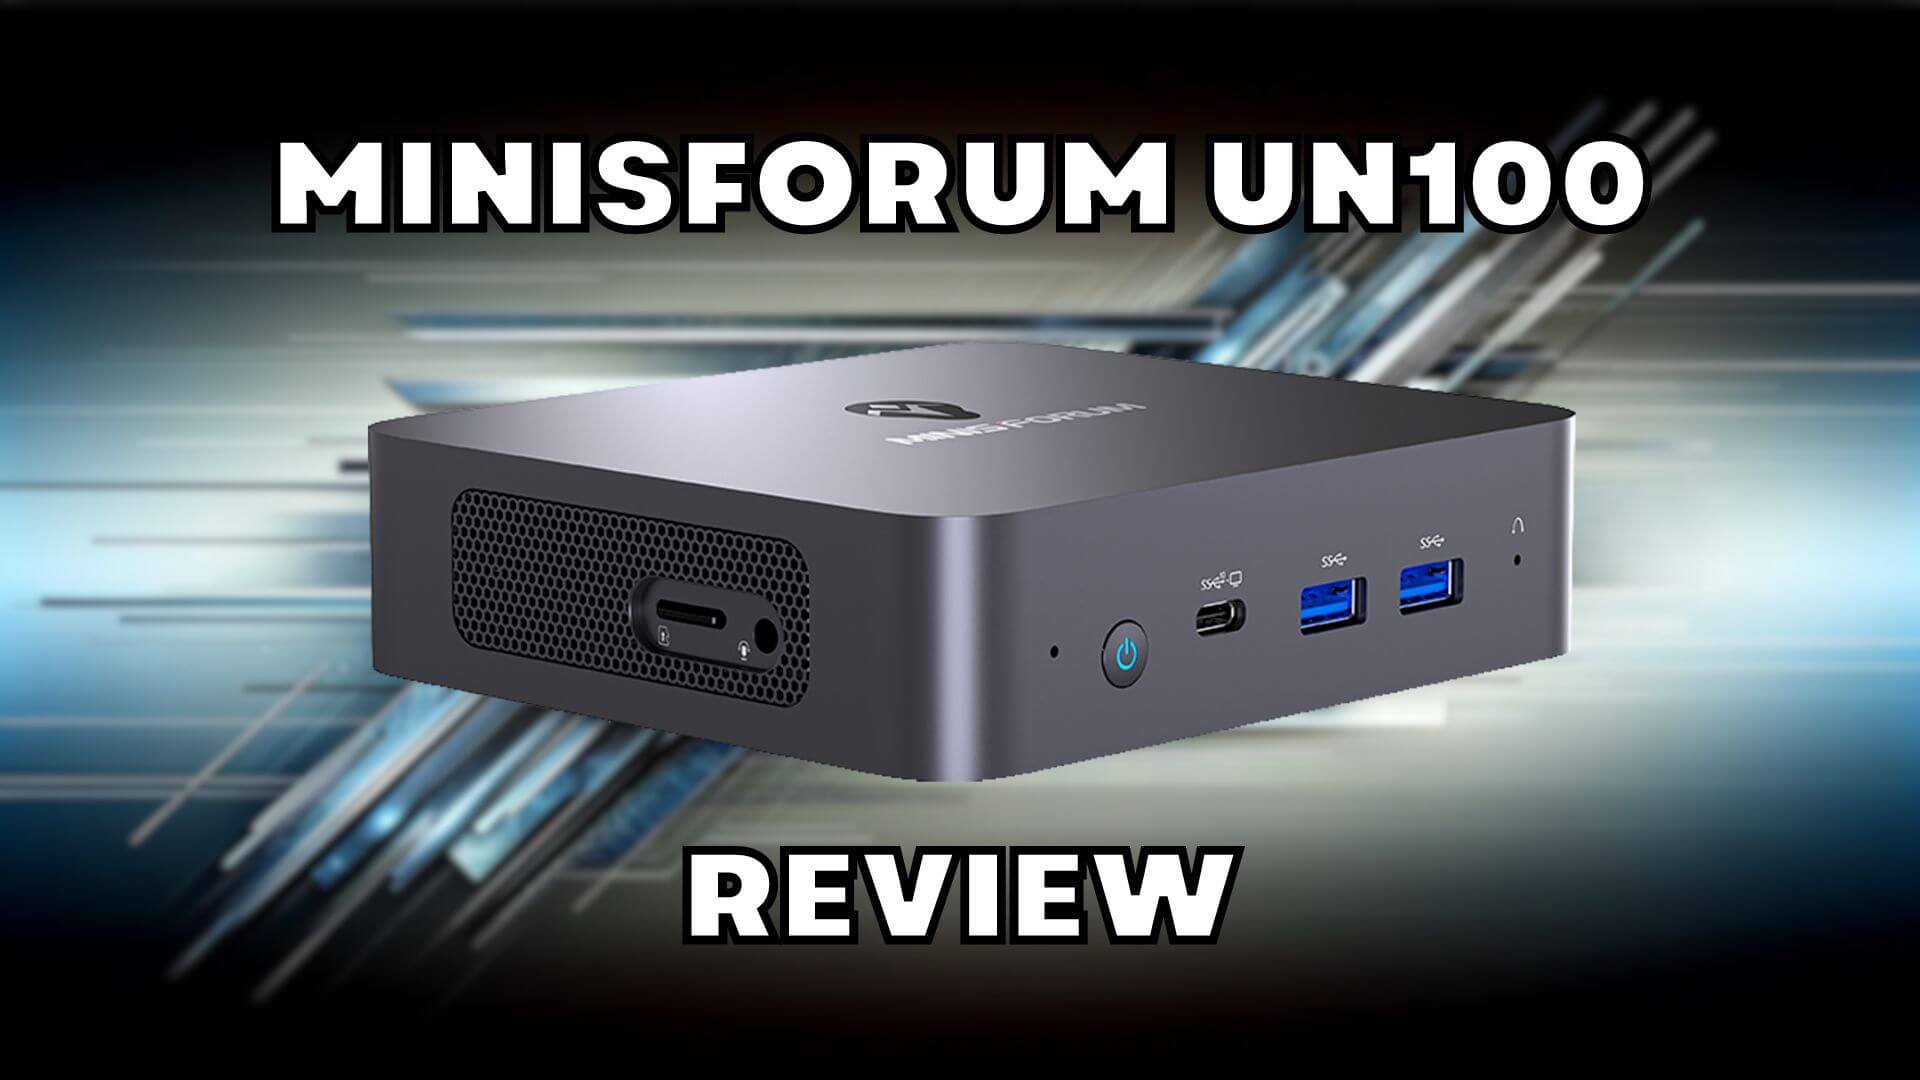 Minisforum UN100 review with video – Awesome high performance, low cost mini PC